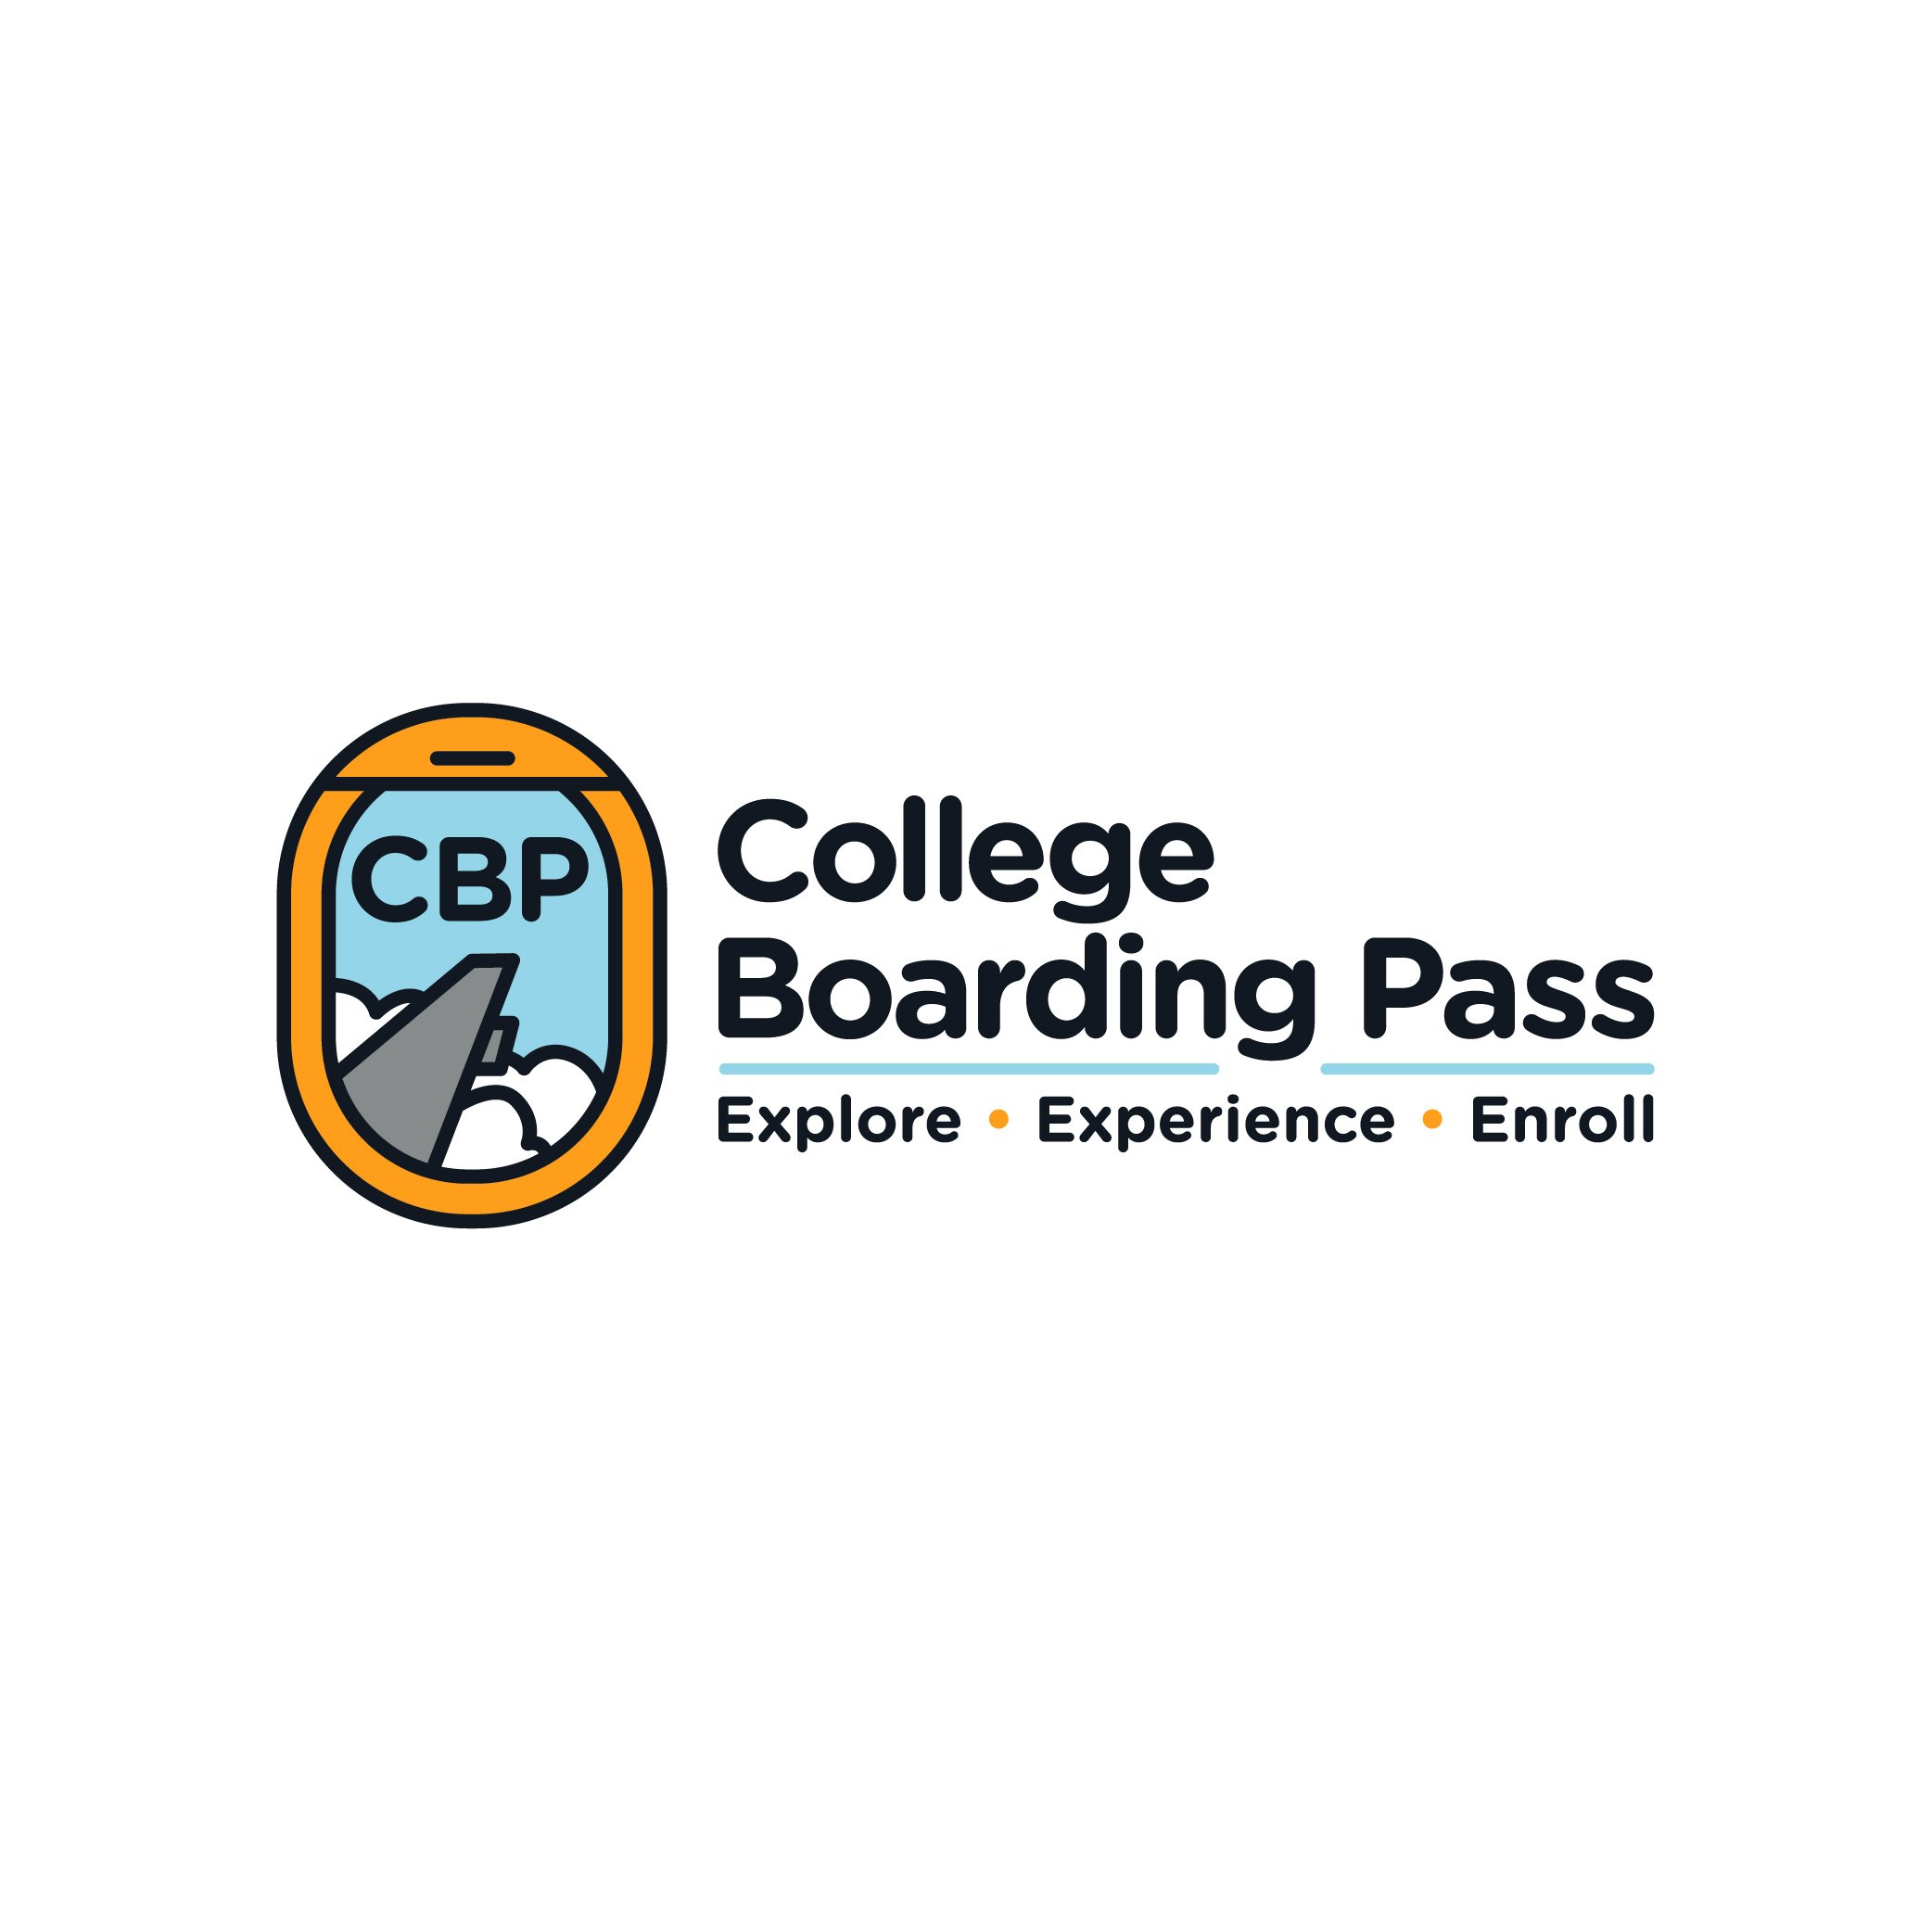 College Boarding Pass is a NY-based 501(c)(3) NPO that offers scholarships to low-income students so that they can visit colleges.